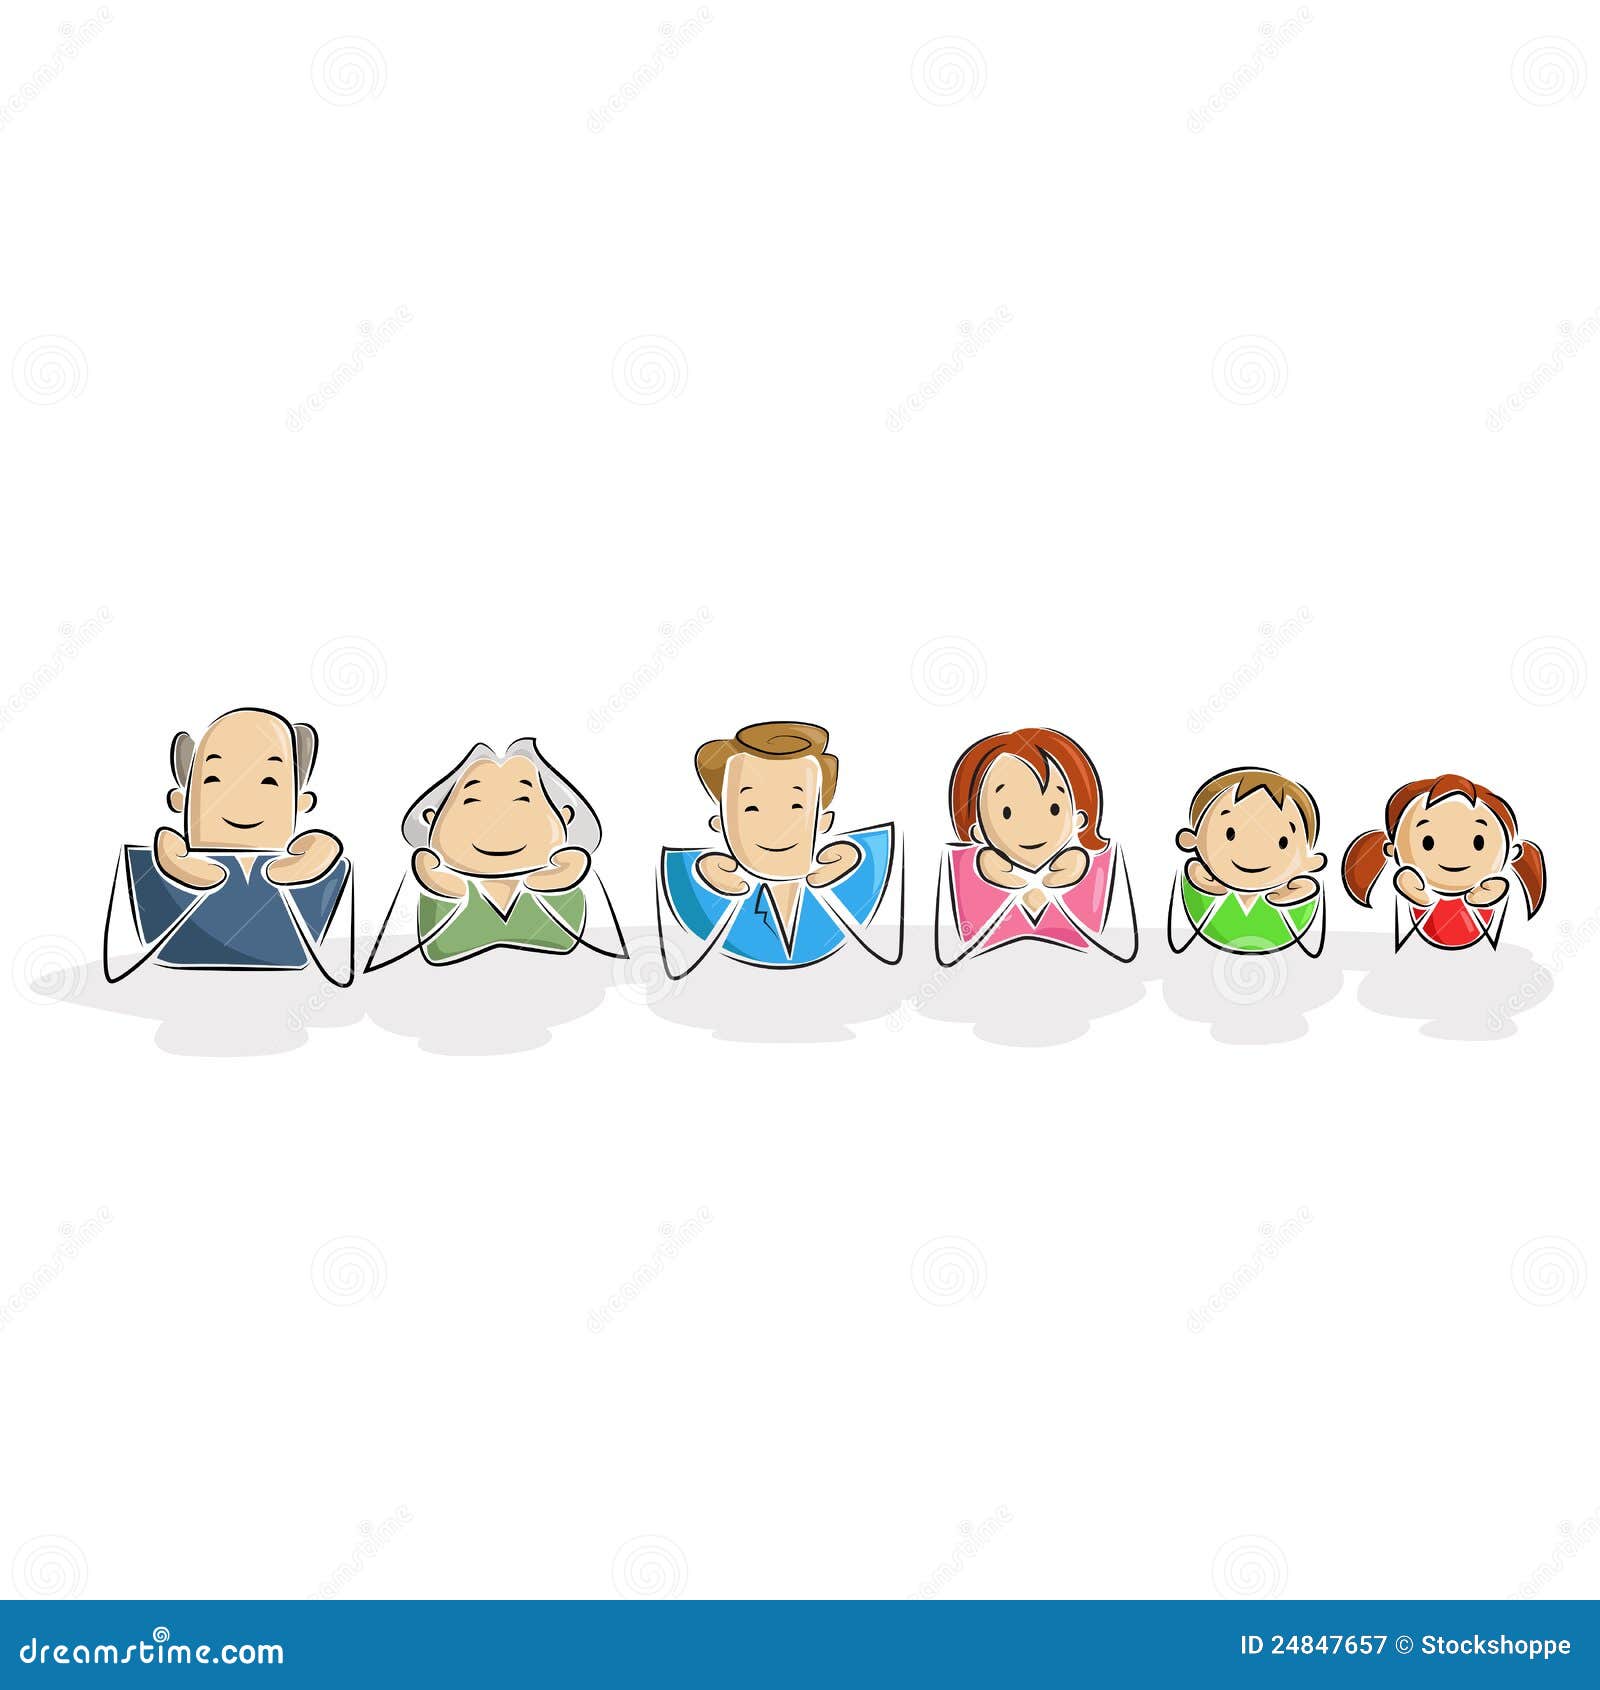 clipart of joint family - photo #14